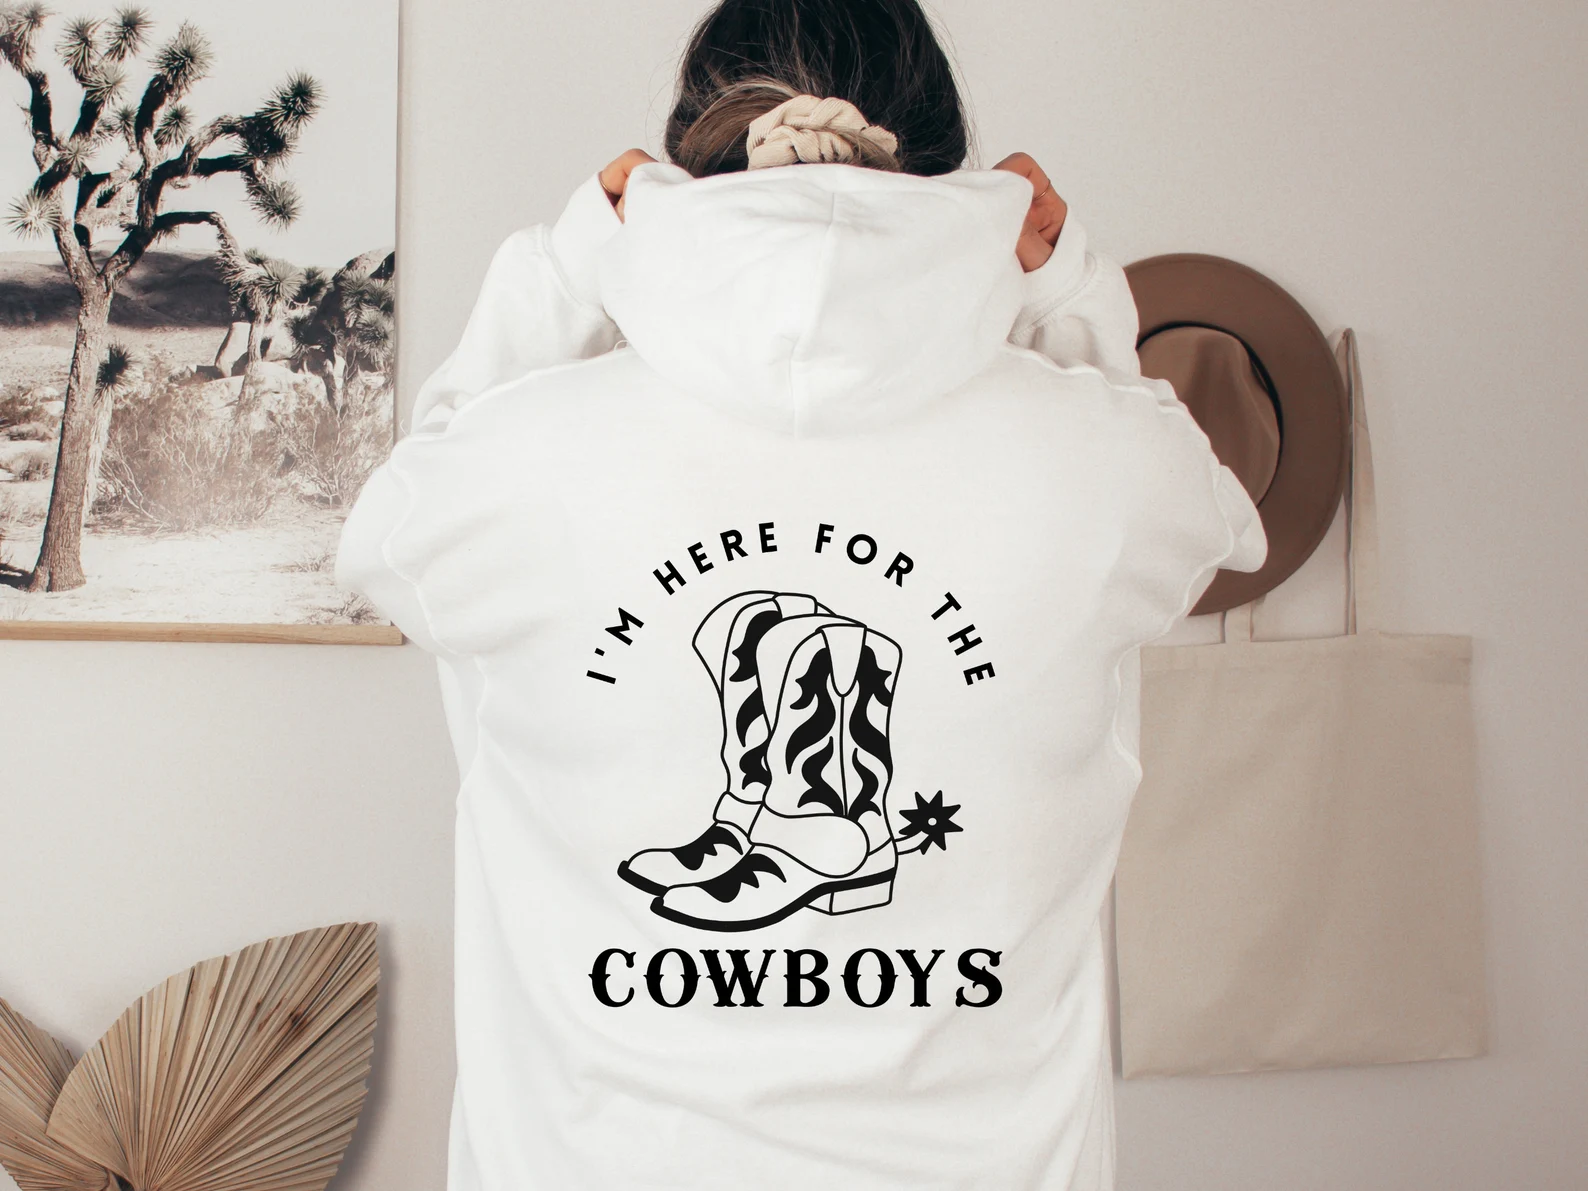 Warm white sweater with cowboy boots illustration on the back.